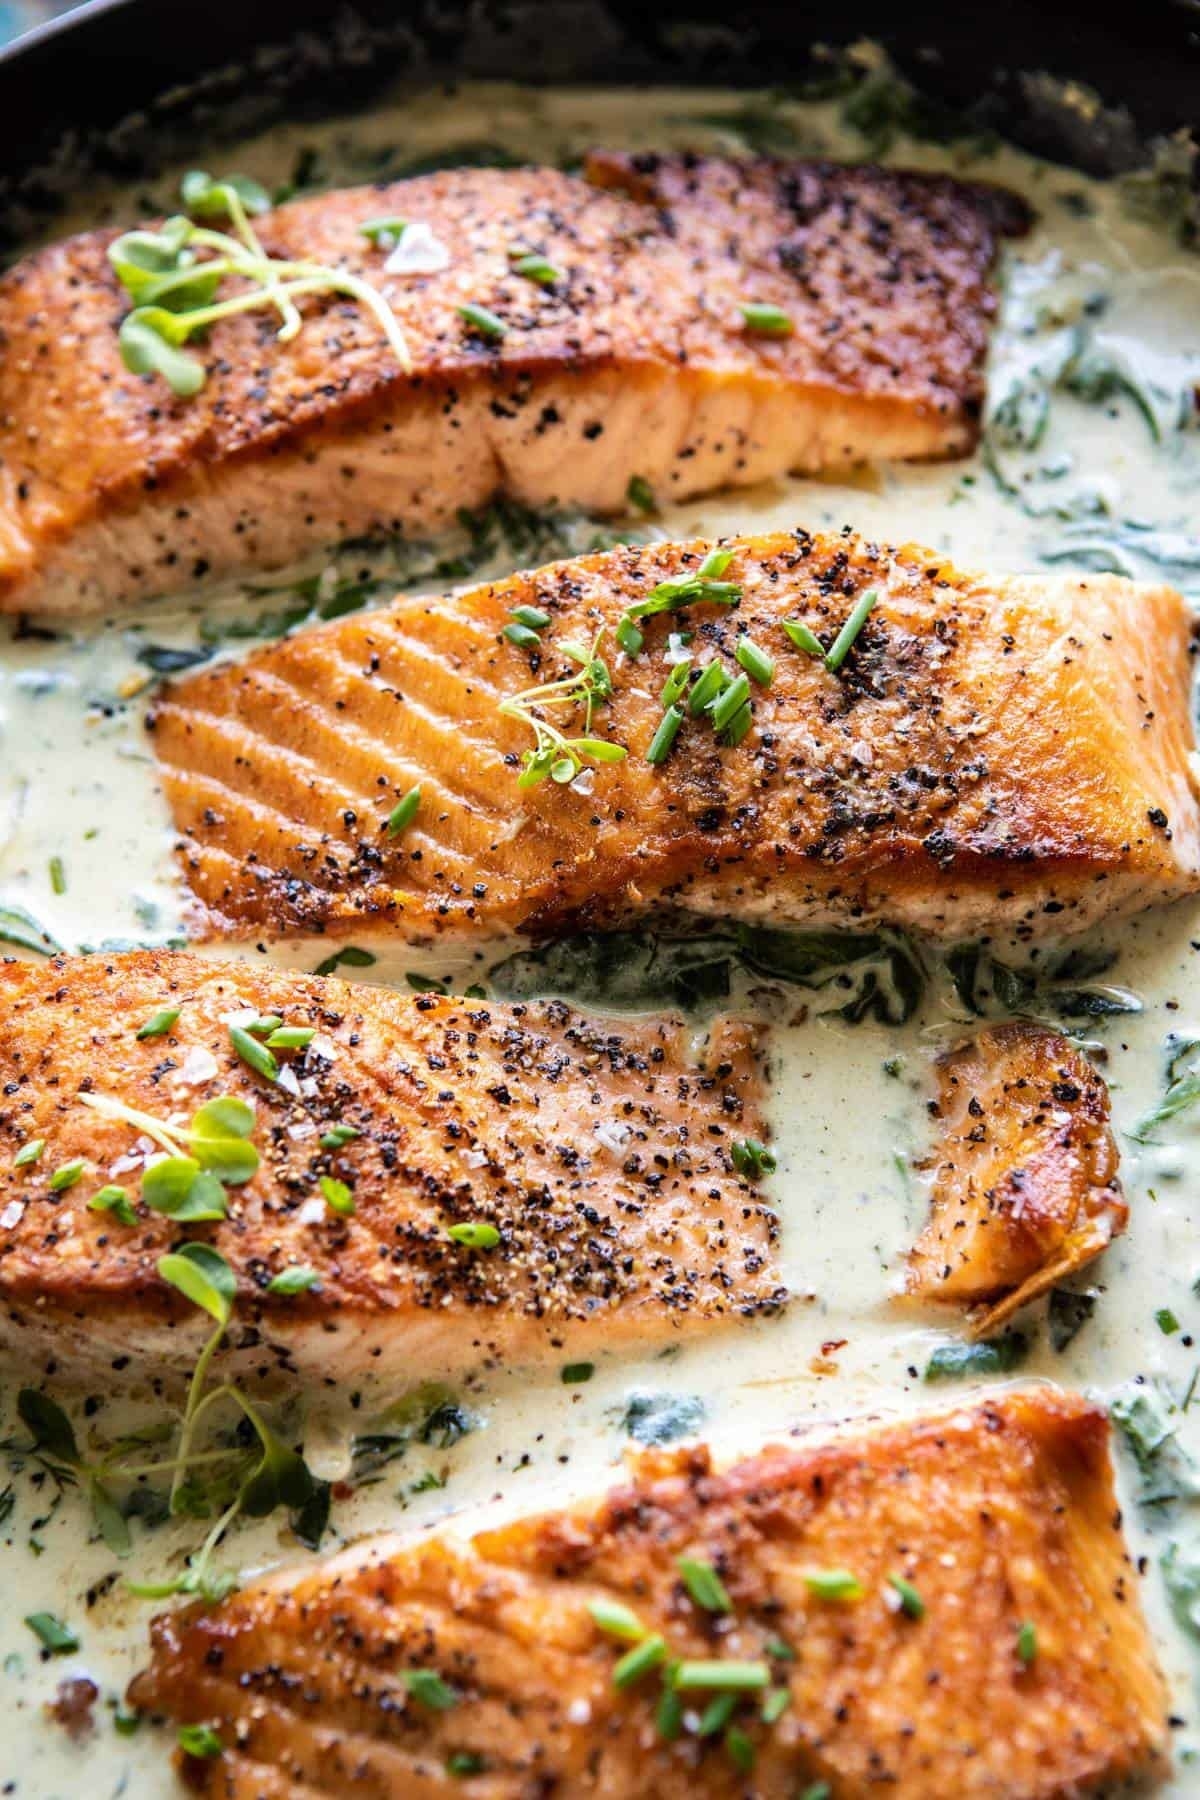 Four cooked salmon fillets in a creamy sauce garnished with herbs in a skillet